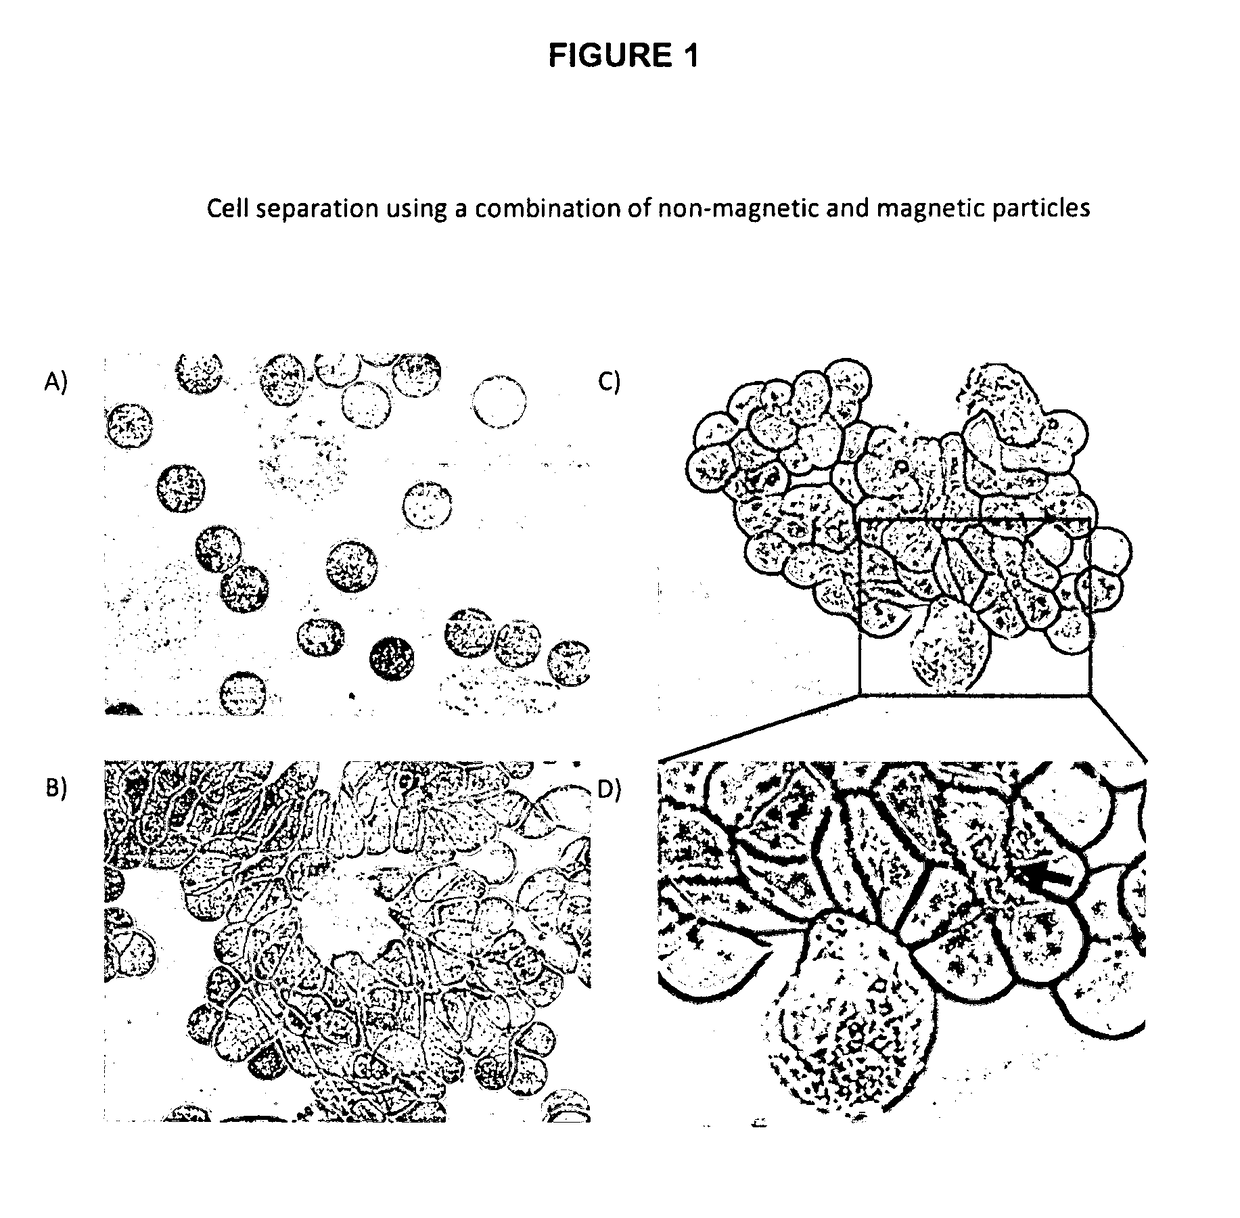 Method for separating cells using immunorosettes and magnetic particles